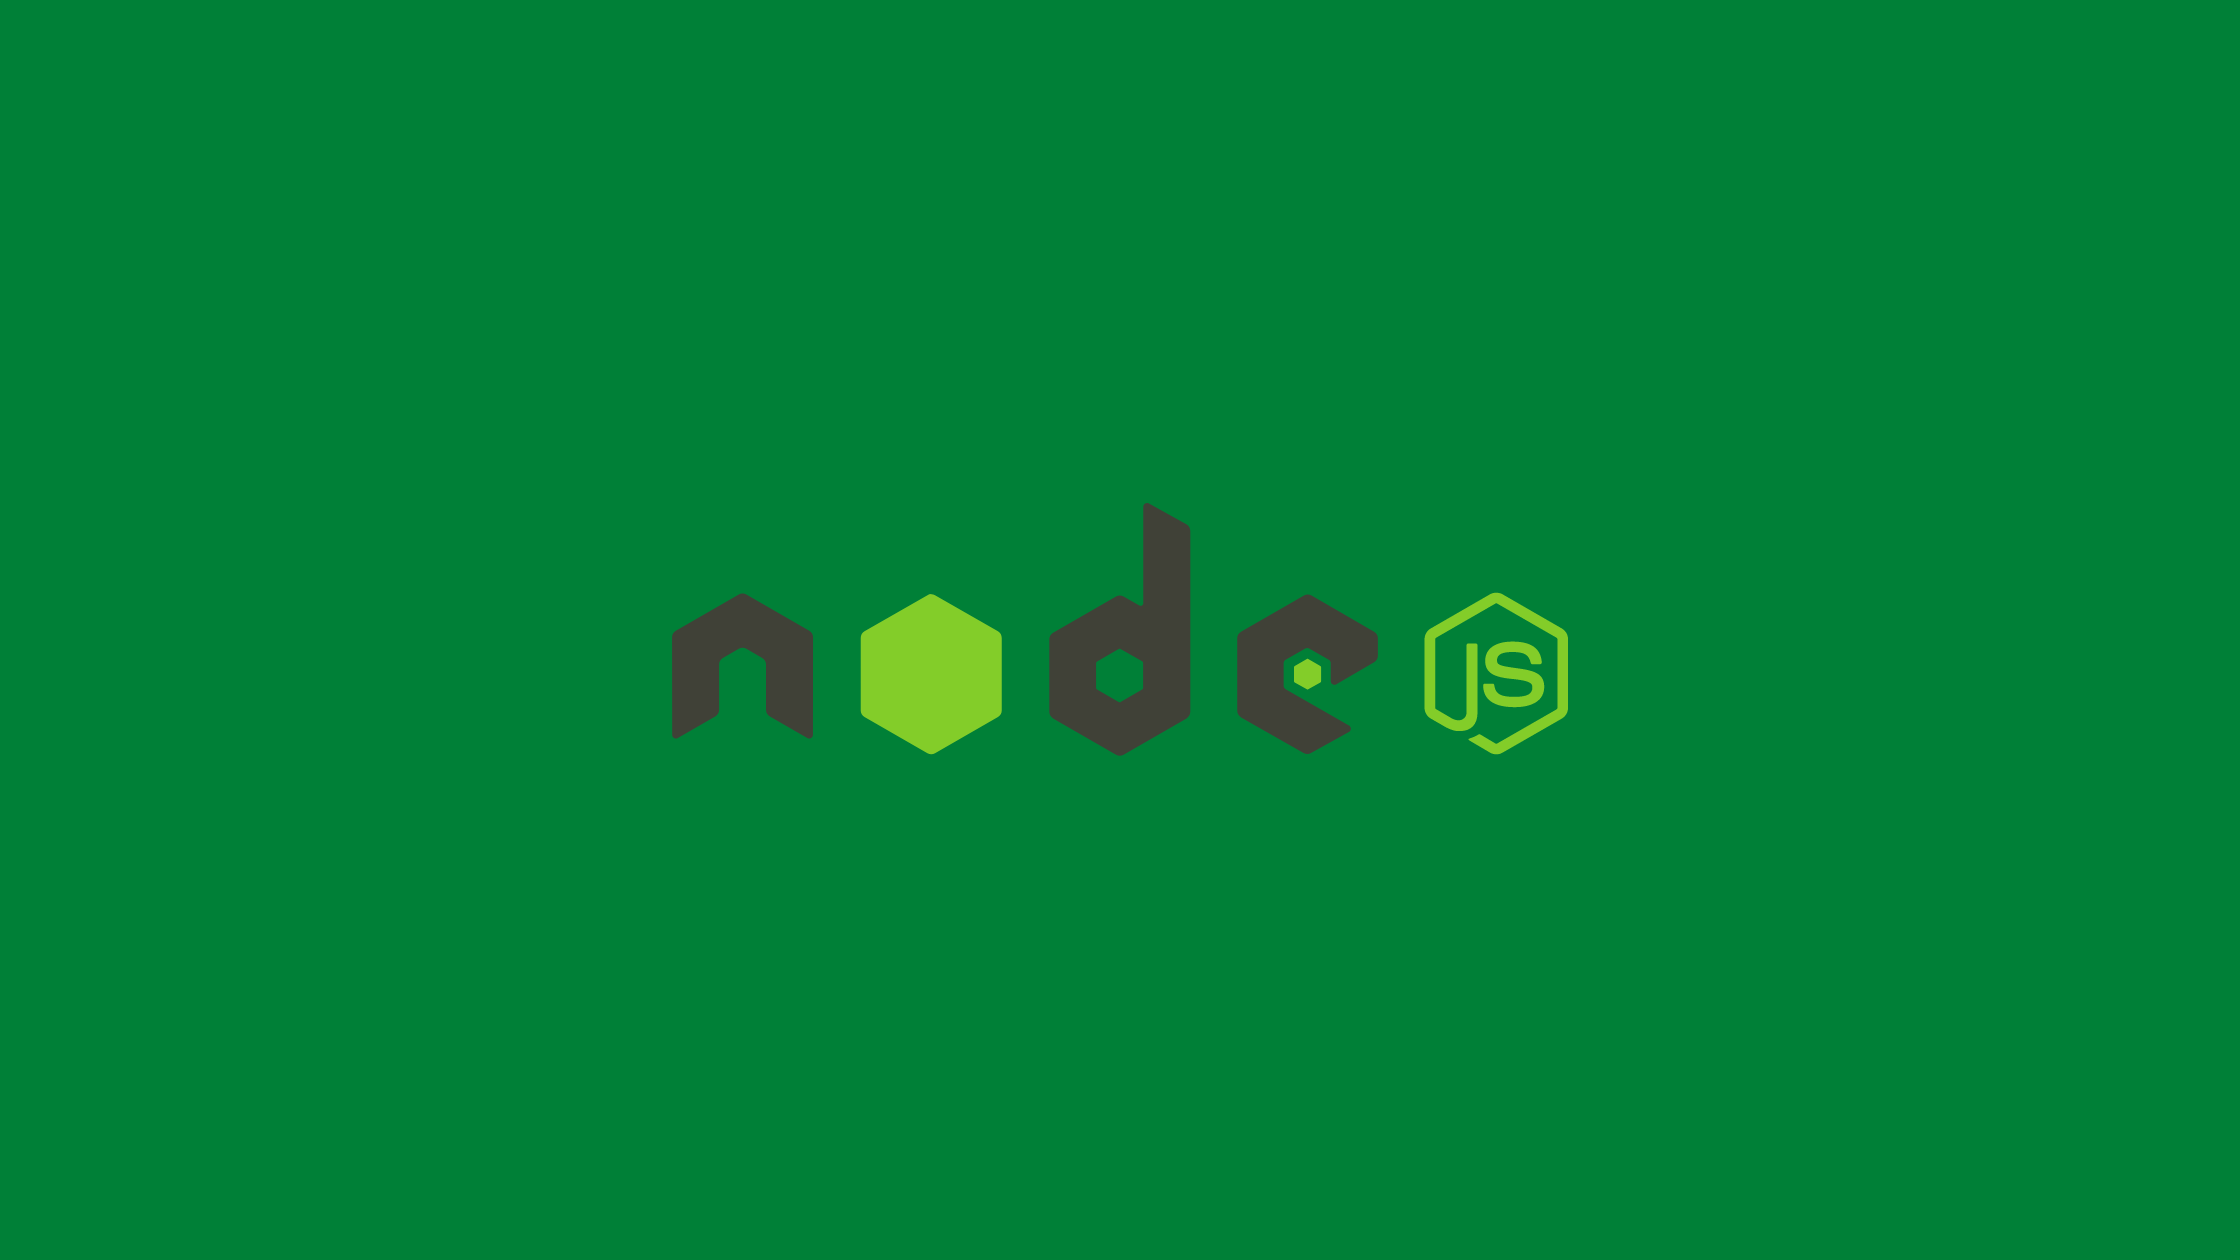 Learn How to Implement a Cache in Nodejs